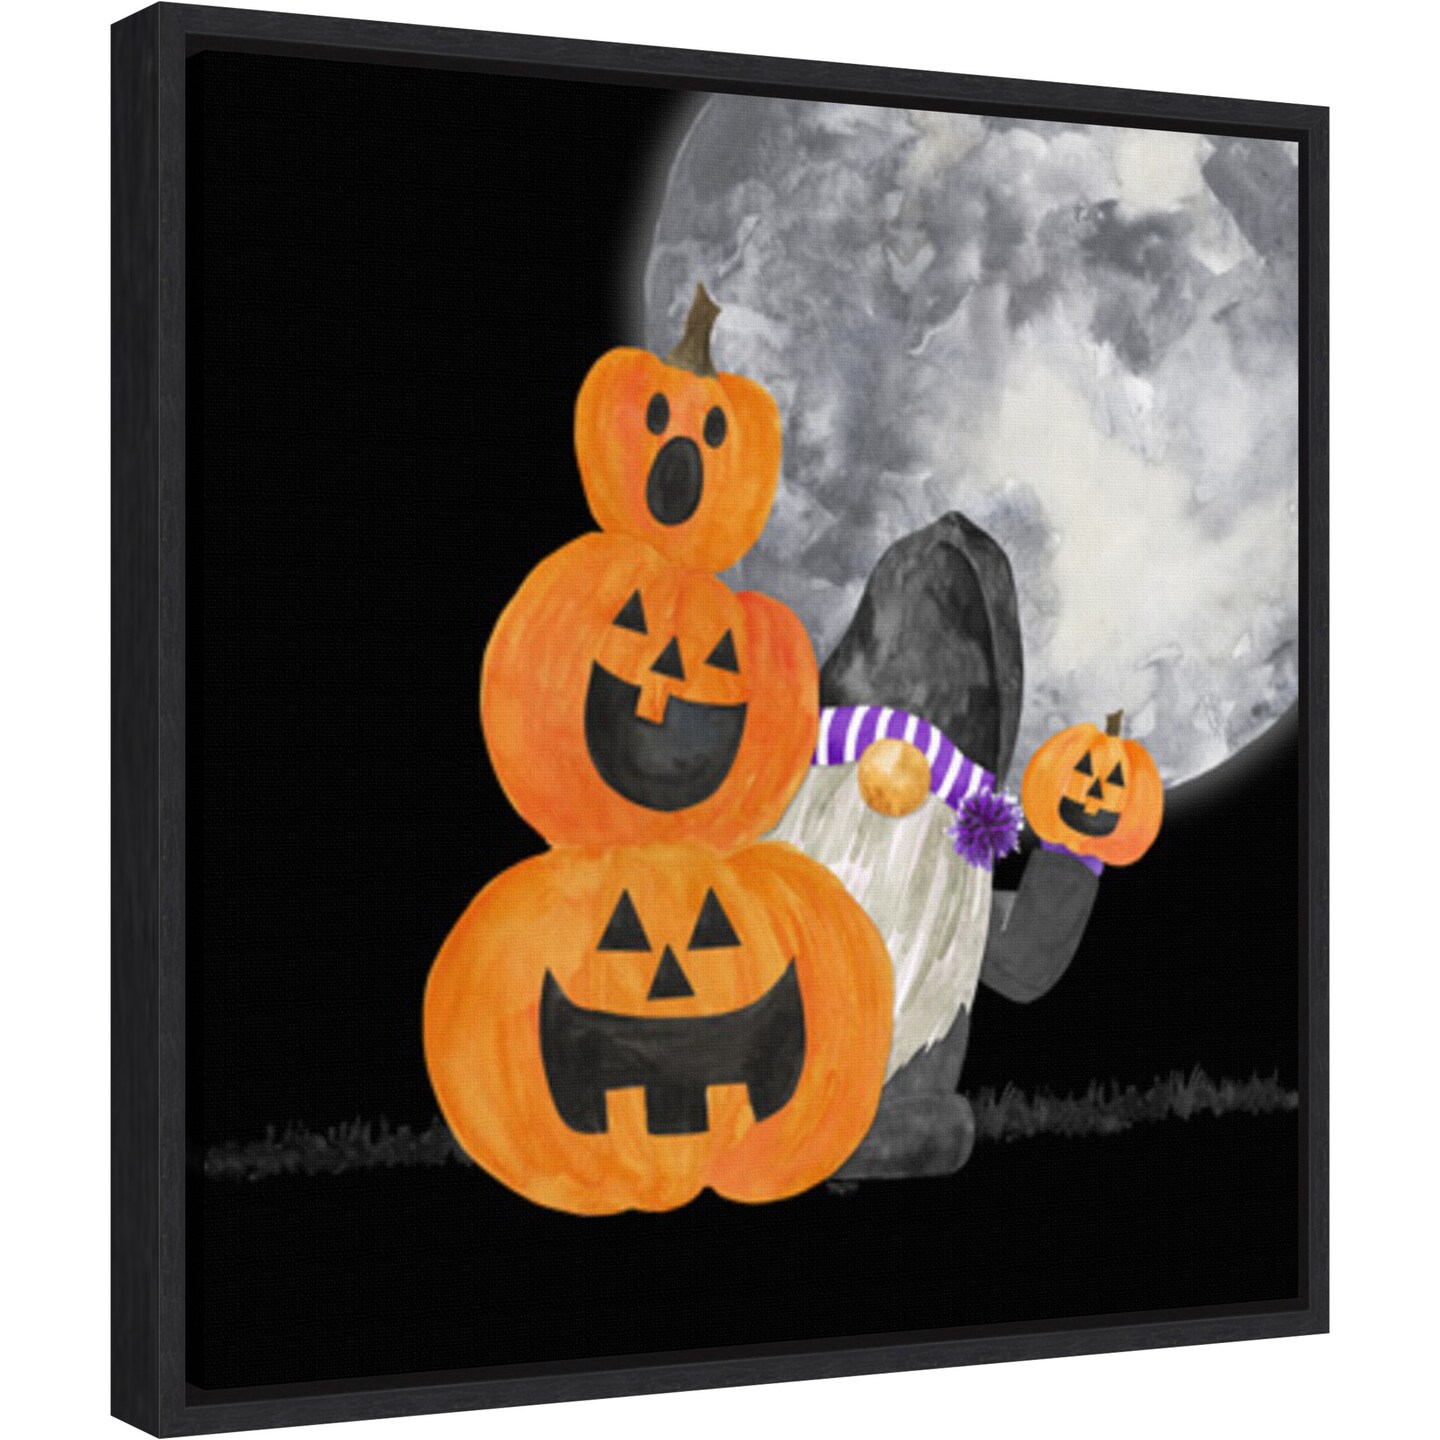 Gnomes of Halloween V-Pumpkins by Tara Reed 16-in. W x 16-in. H. Canvas Wall Art Print Framed in Black